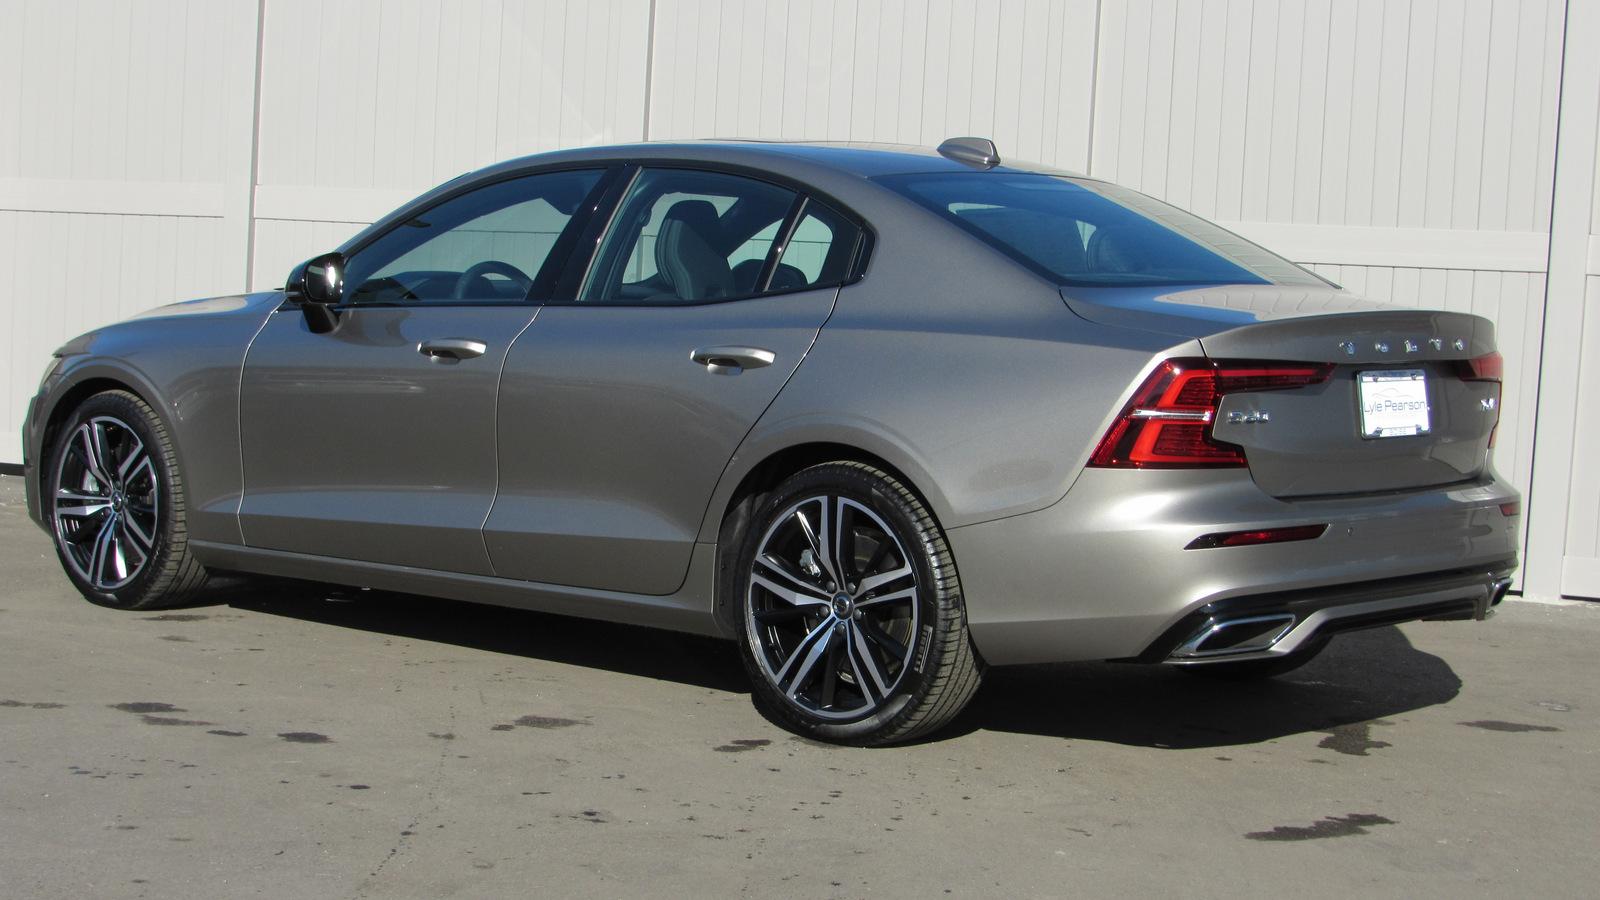 New 2019 Volvo S60 T6 AWD RDesign 4dr Car in Boise